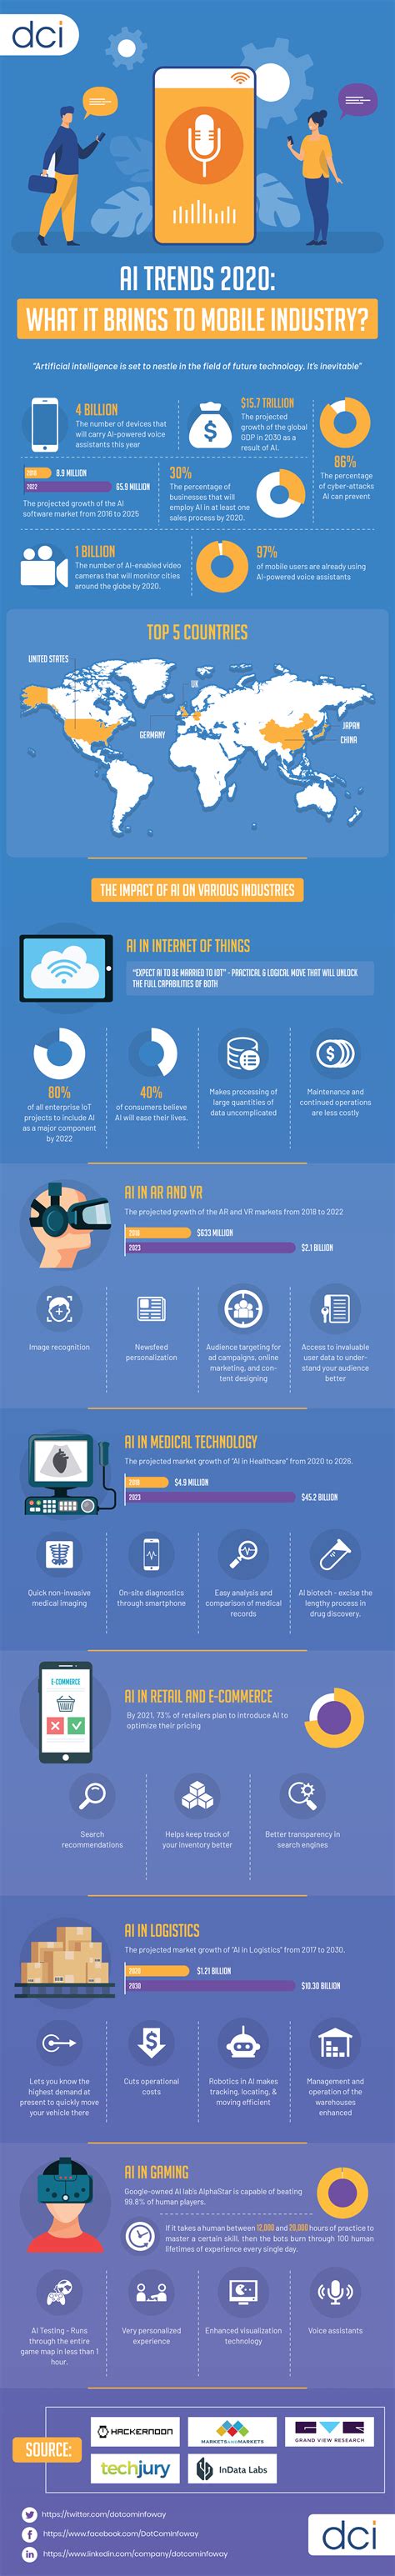 Infographic Ai Trends And Mobile App Development In 2020 Dot Com Infoway